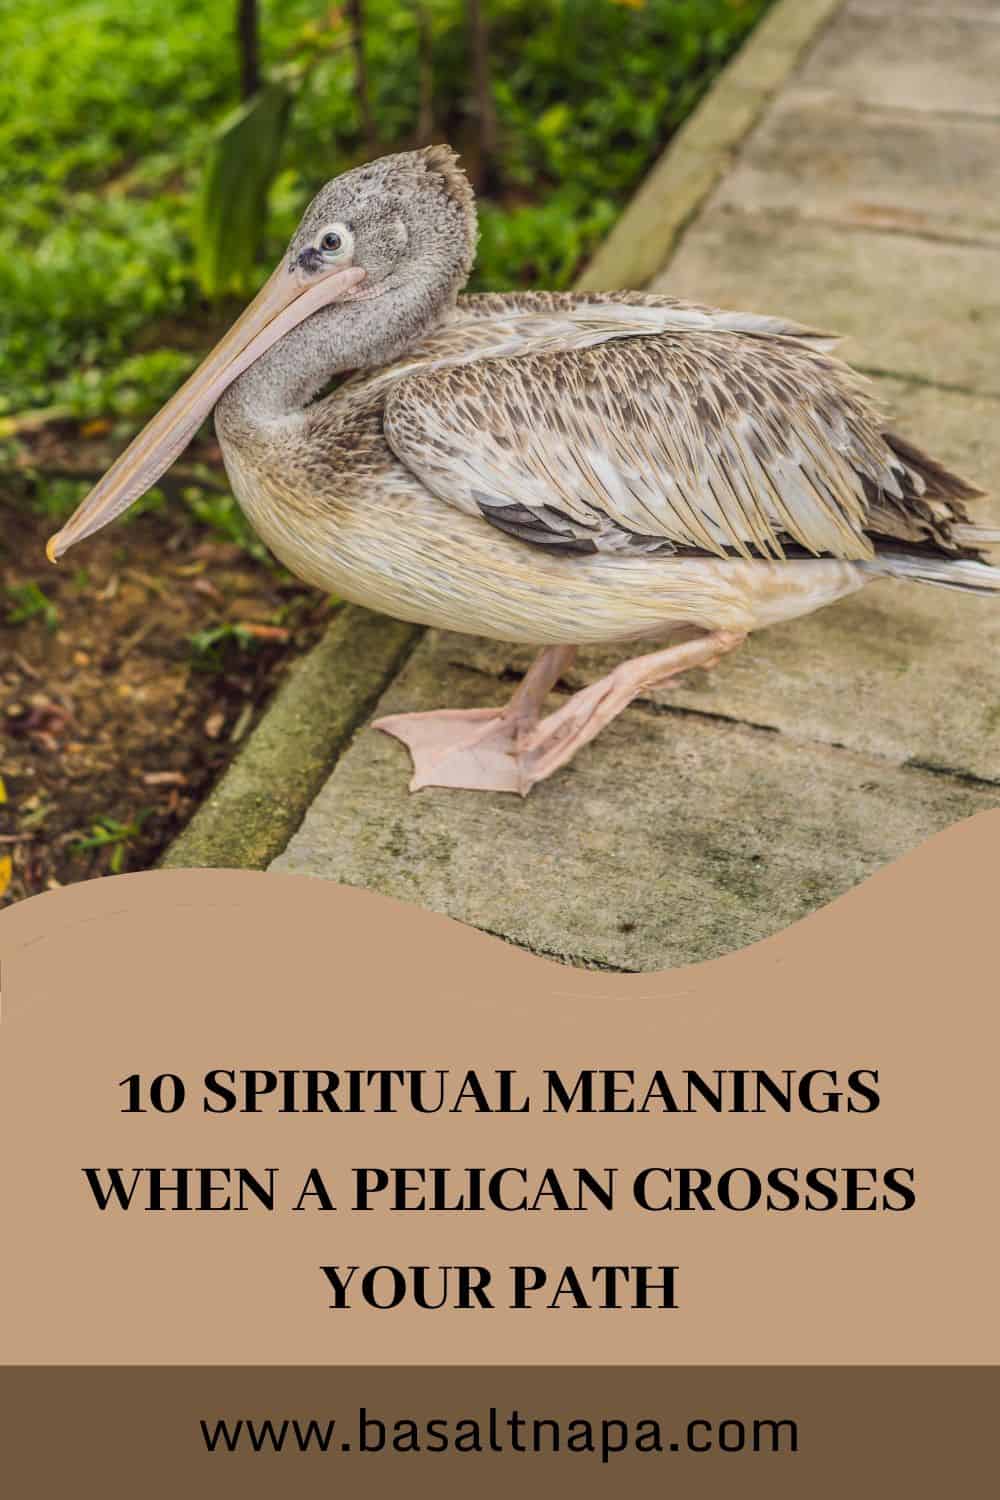 10 Meanings of a Pelican Crossing Your Path